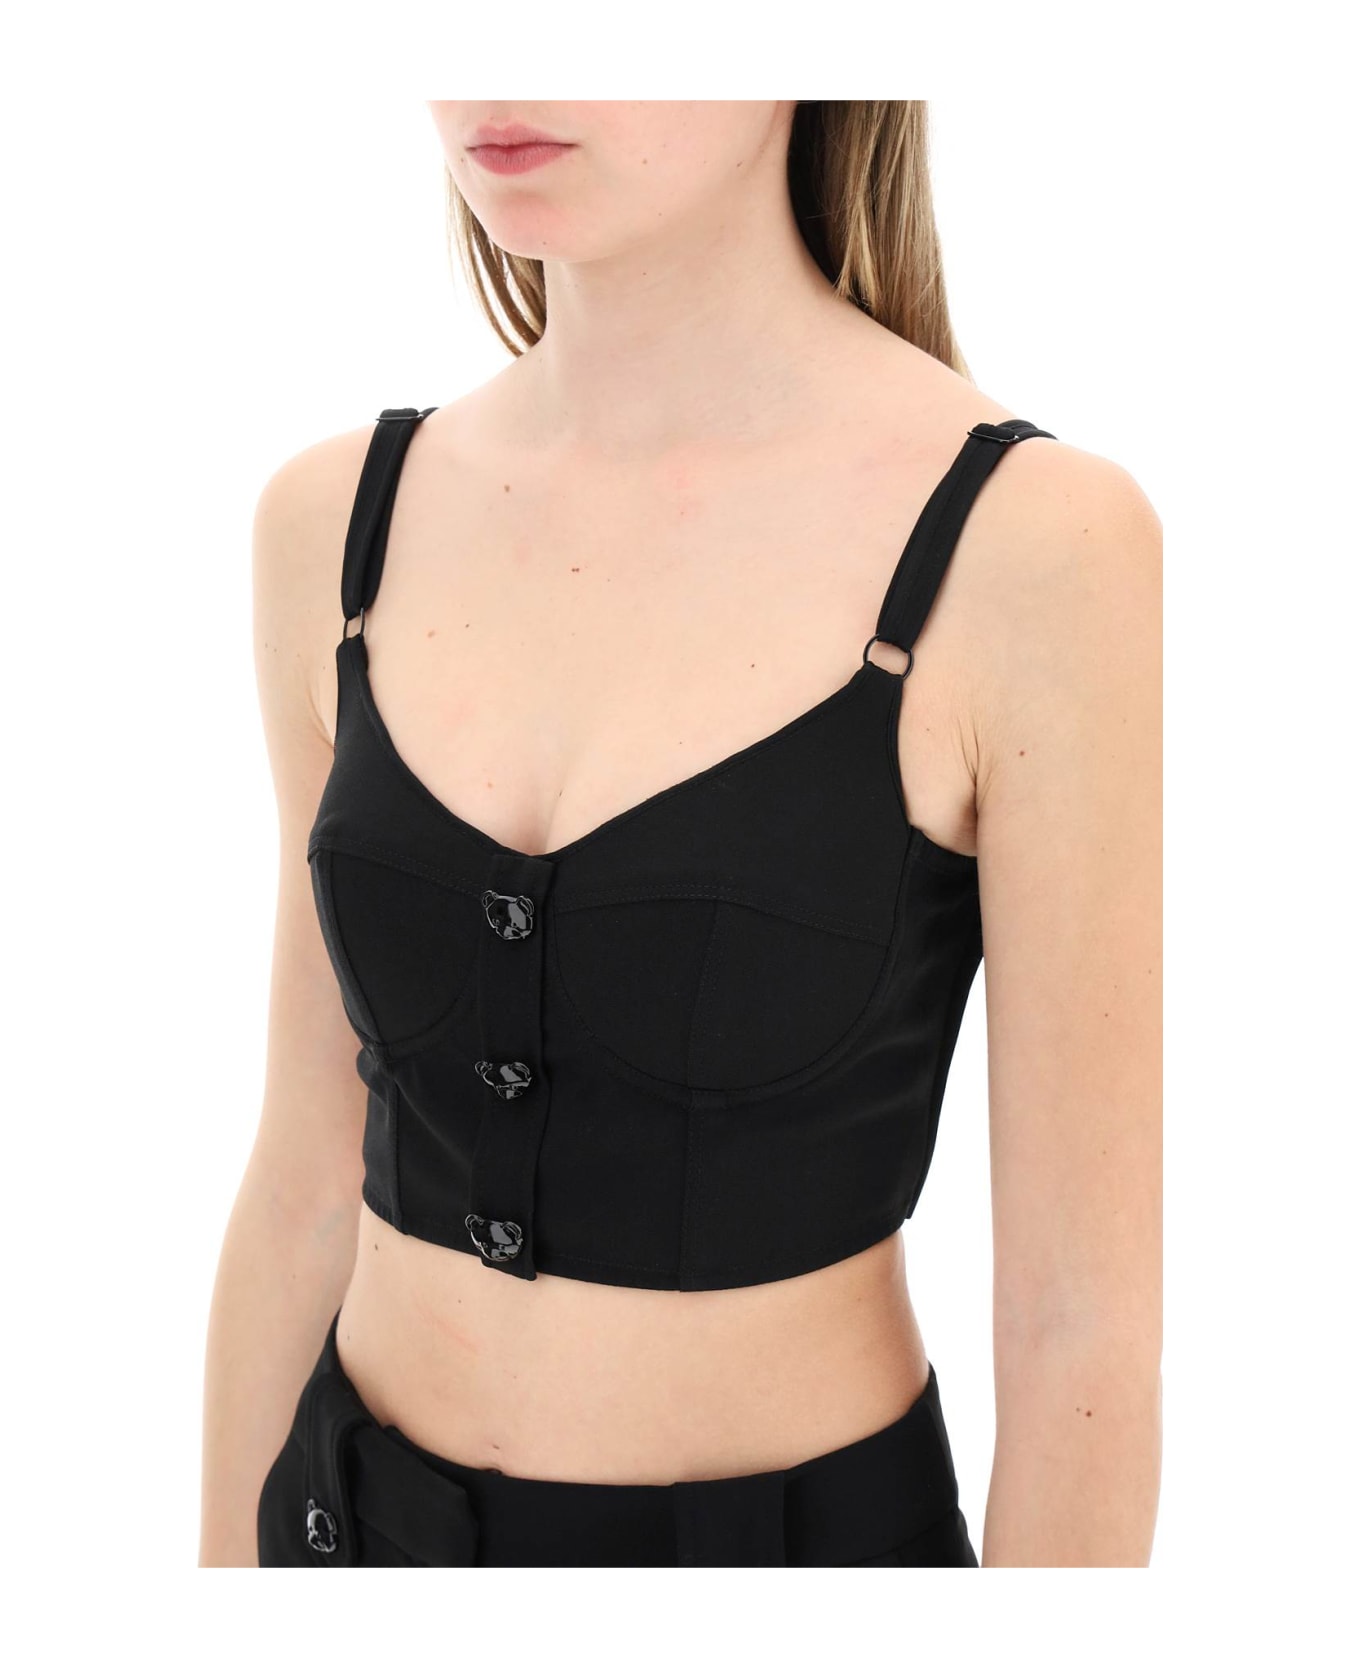 Moschino Bustier Top With Teddy Bear Buttons - FANTASIA NERO (Black)